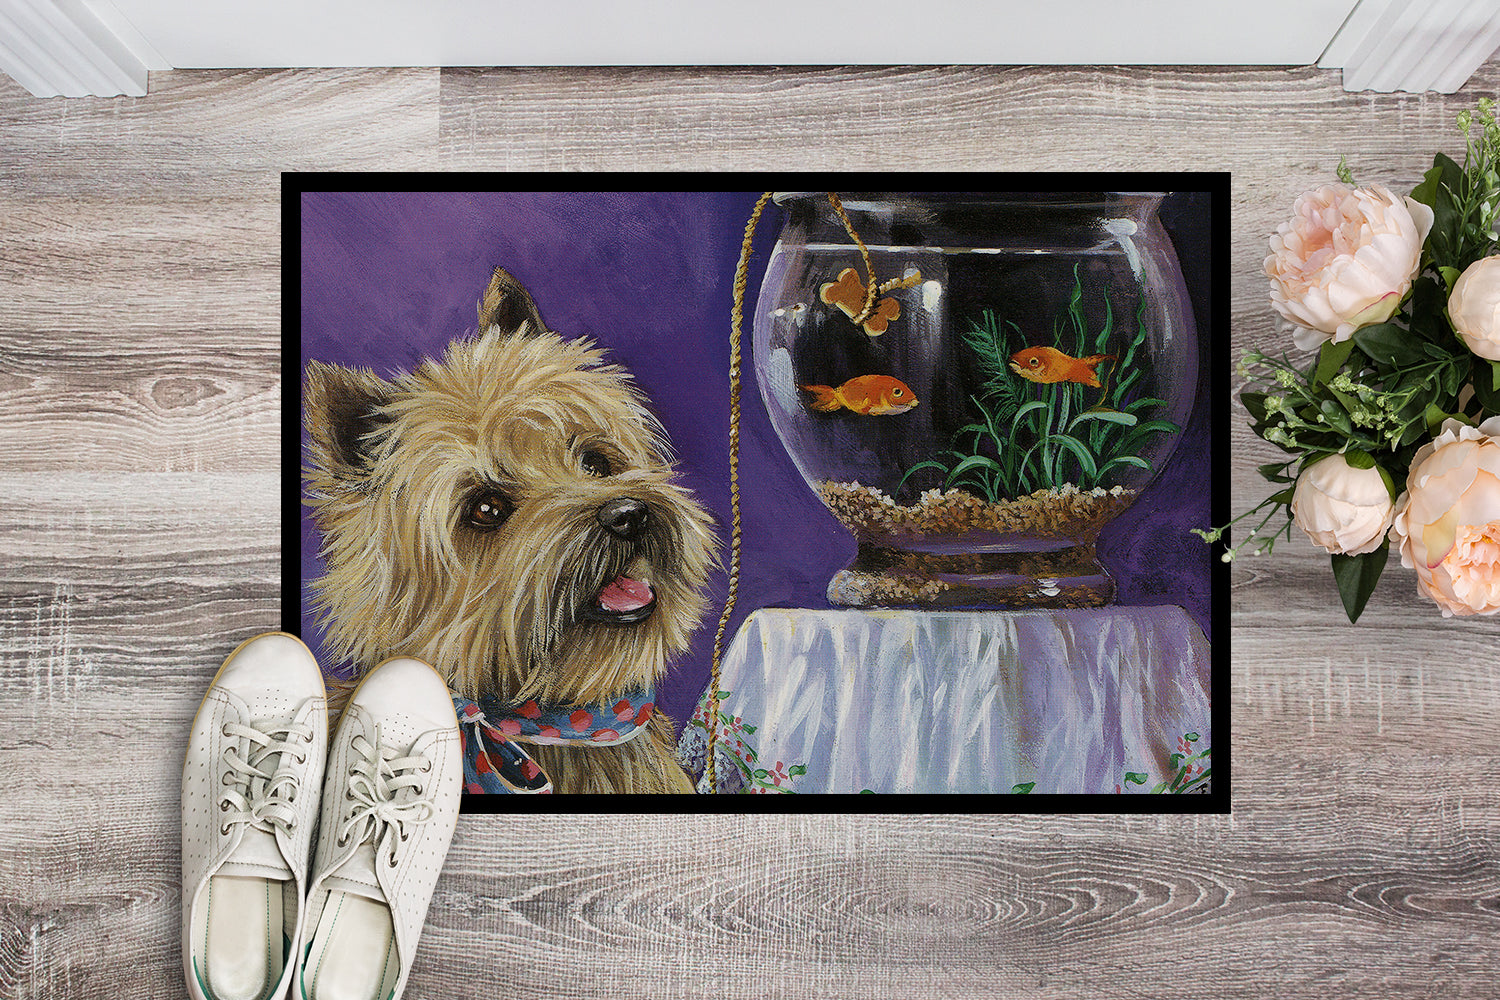 Cairn Terrier Gone Fishing Indoor or Outdoor Mat 18x27 PPP3252MAT - the-store.com